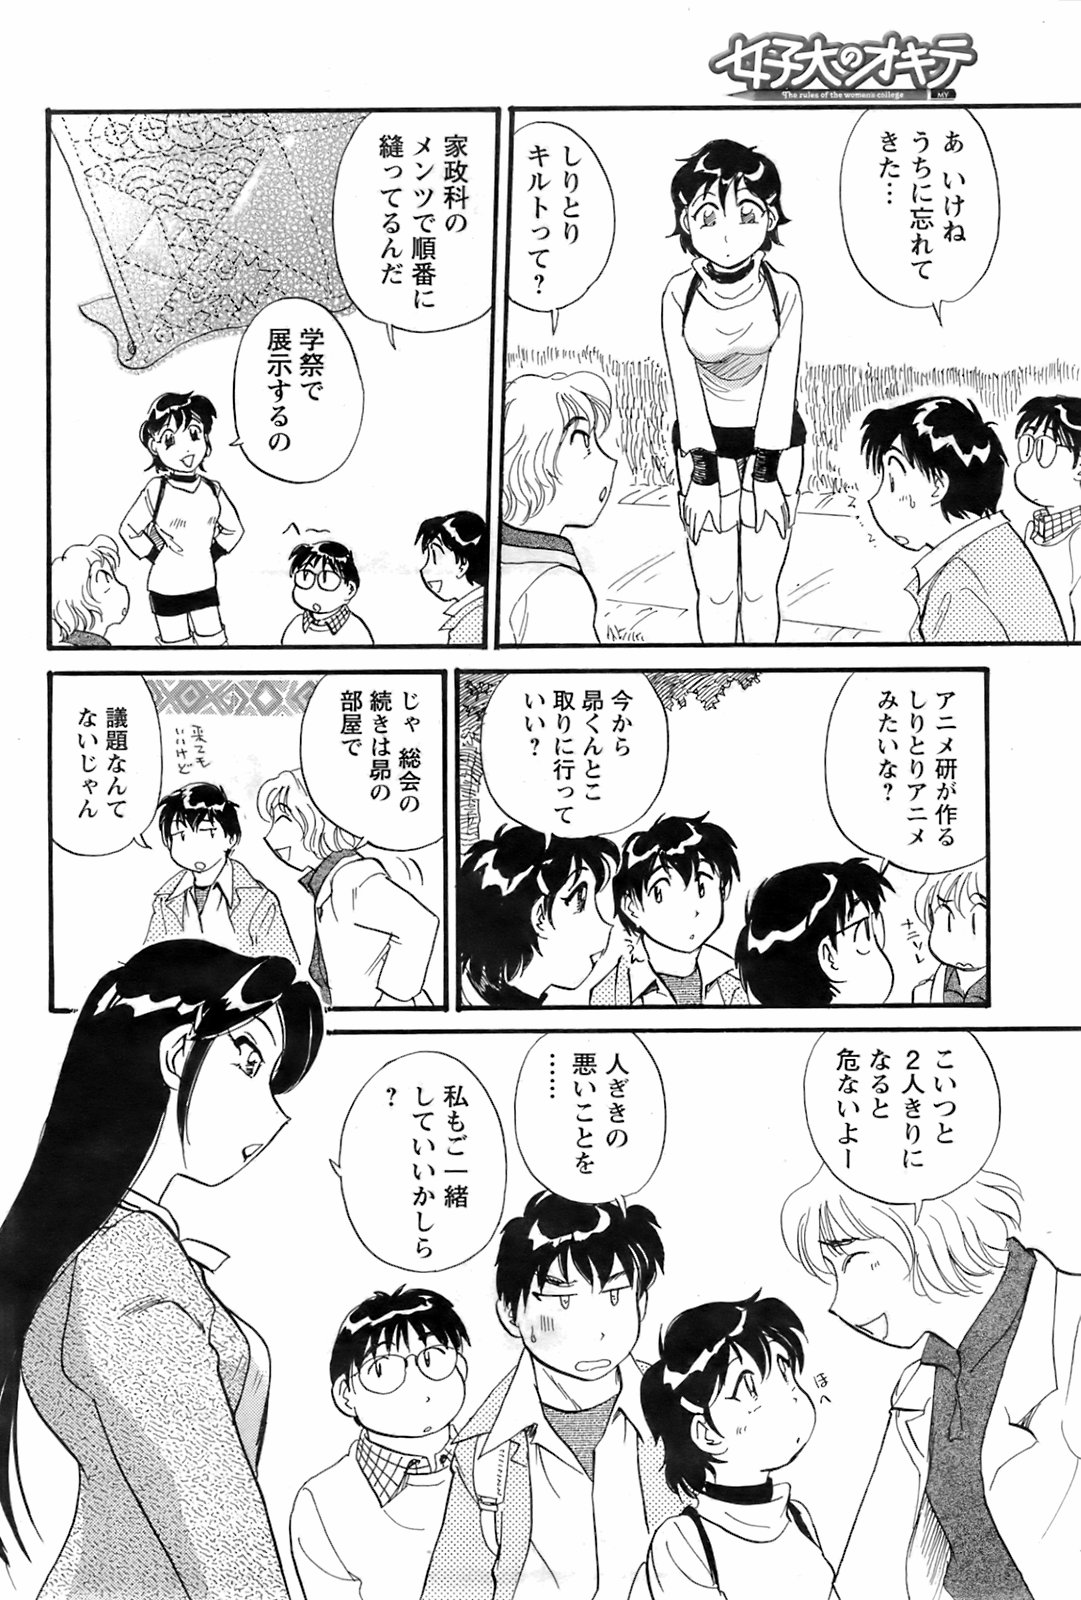 [Hotta Kei] The rules of the women&#039;s college ch.1-9 [法田恵] 女子大のオキテ 章1-9